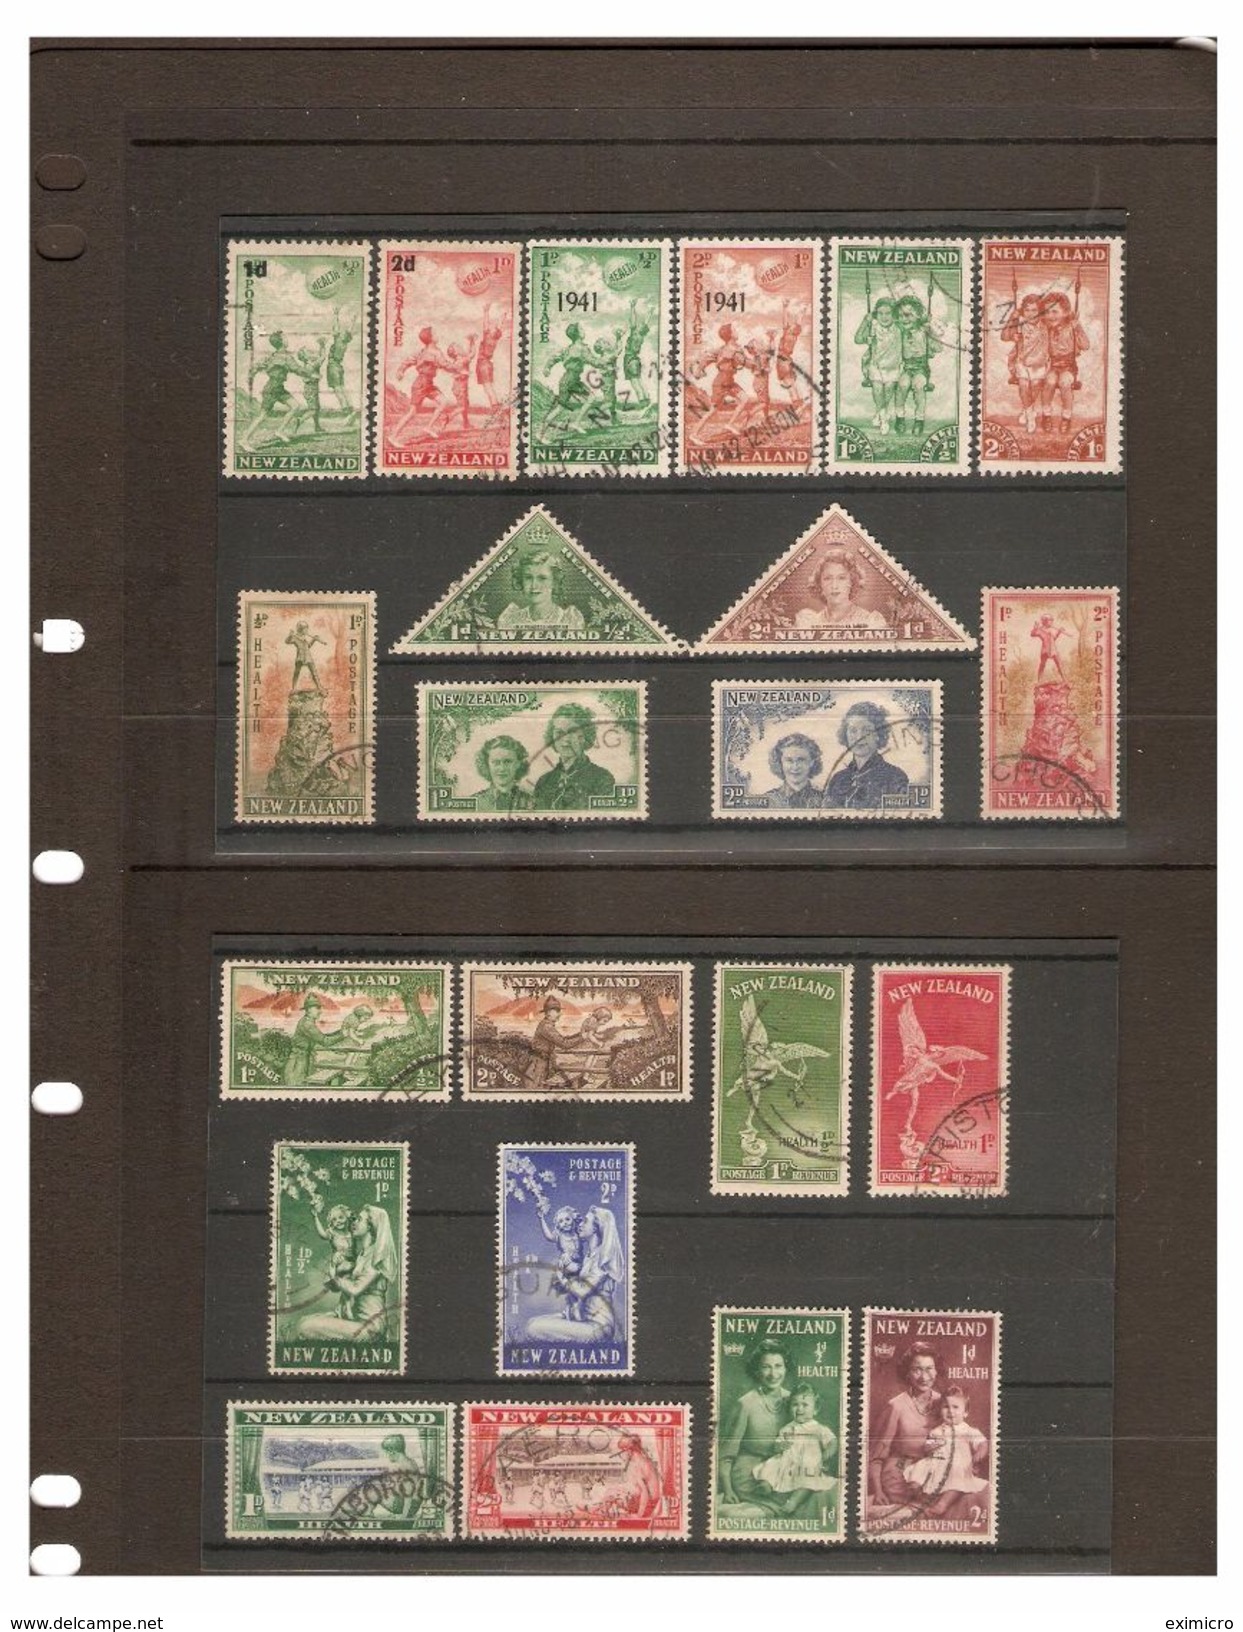 NEW ZEALAND HEALTH SETS COLLECTION BETWEEN 1939 And 1950 FINE USED Cat £23+ - Collections, Lots & Series